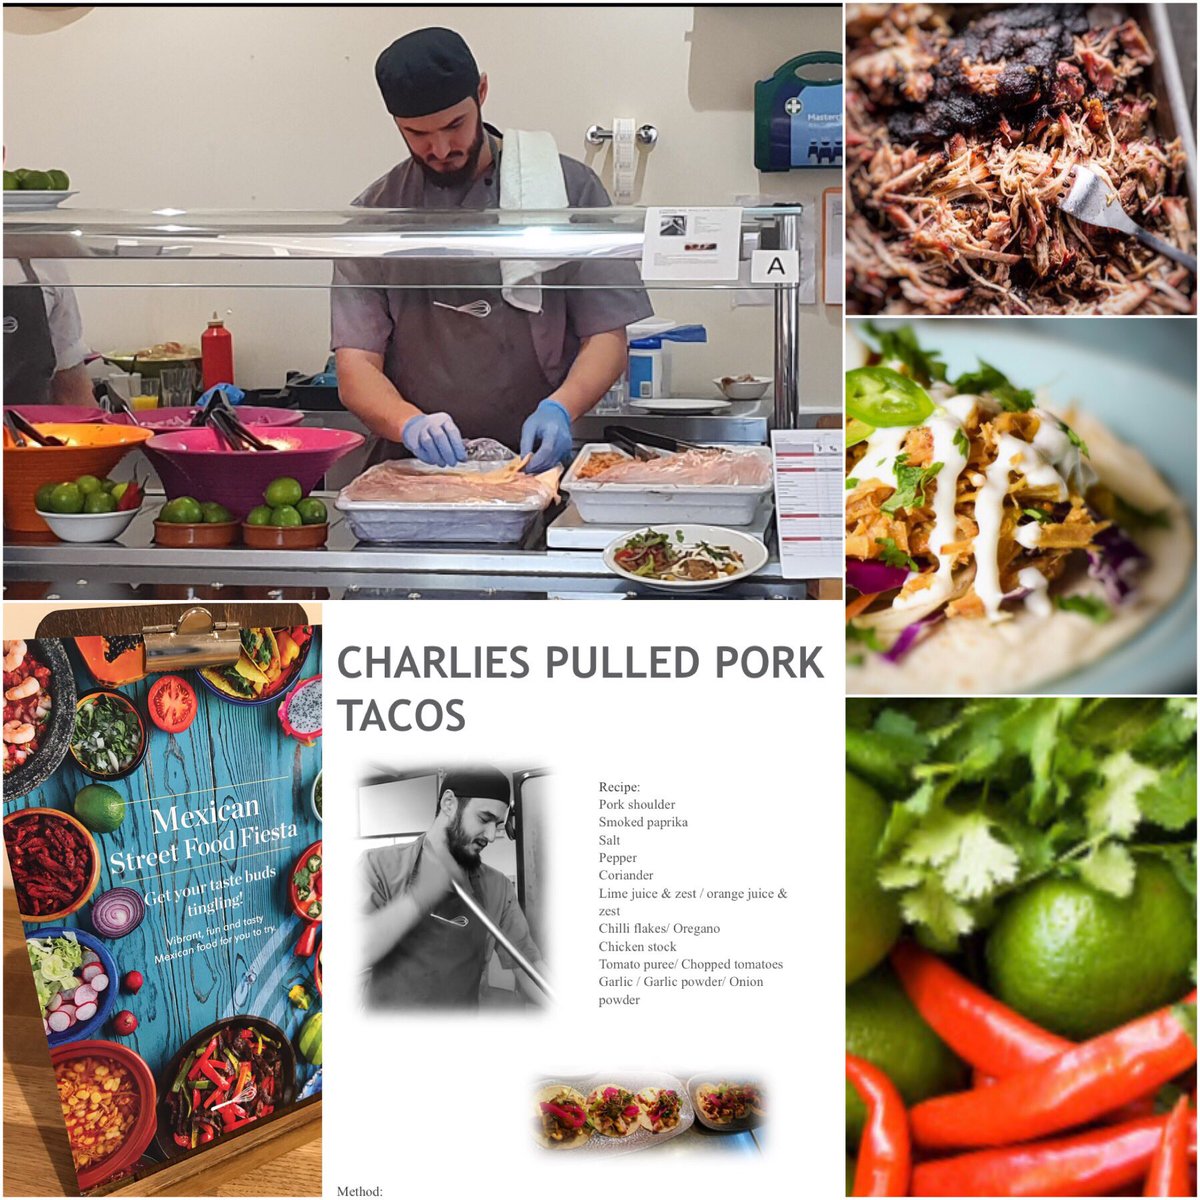 Pulled pork tacos on our lunch menu served by Chef Charlie 
#Mexicanstreetfood 
@ChartwellsInd